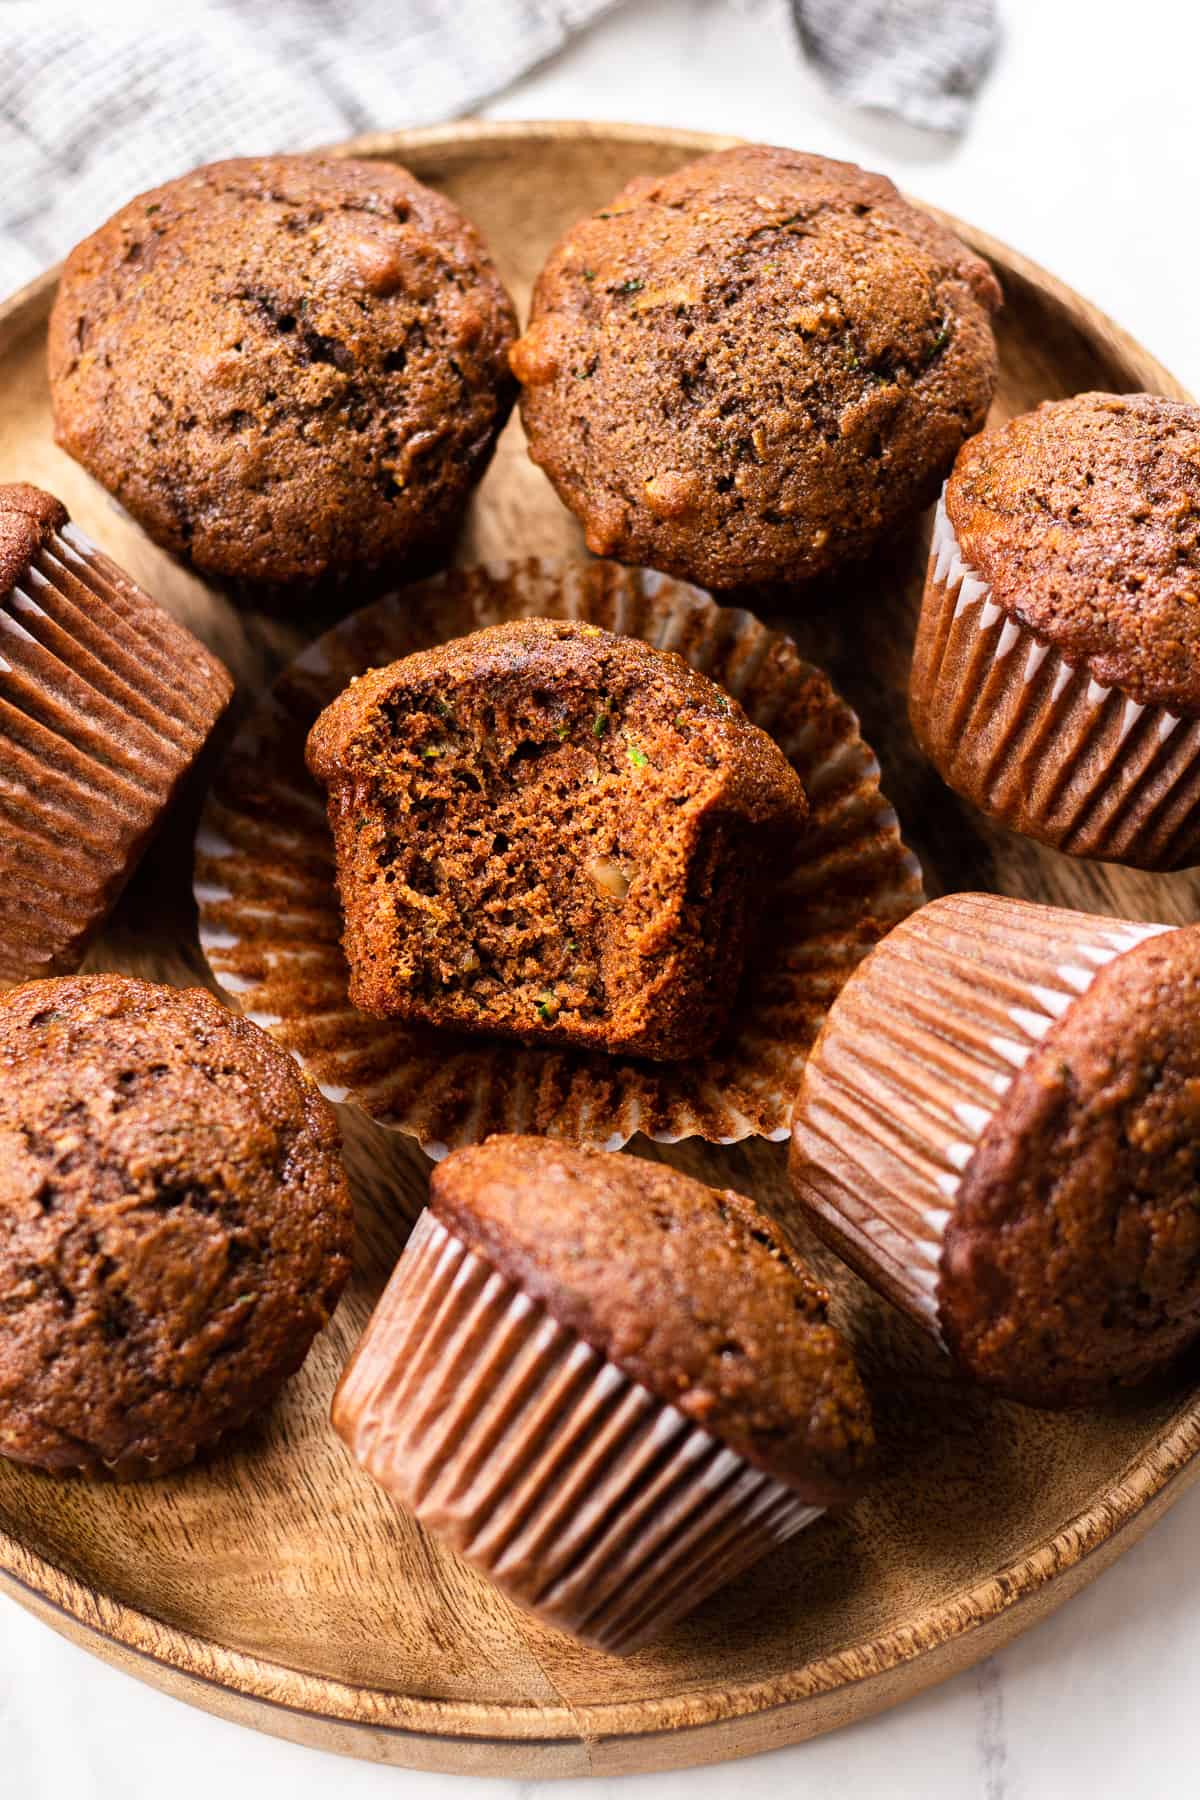 Chocolate Muffins on a wooden plate.